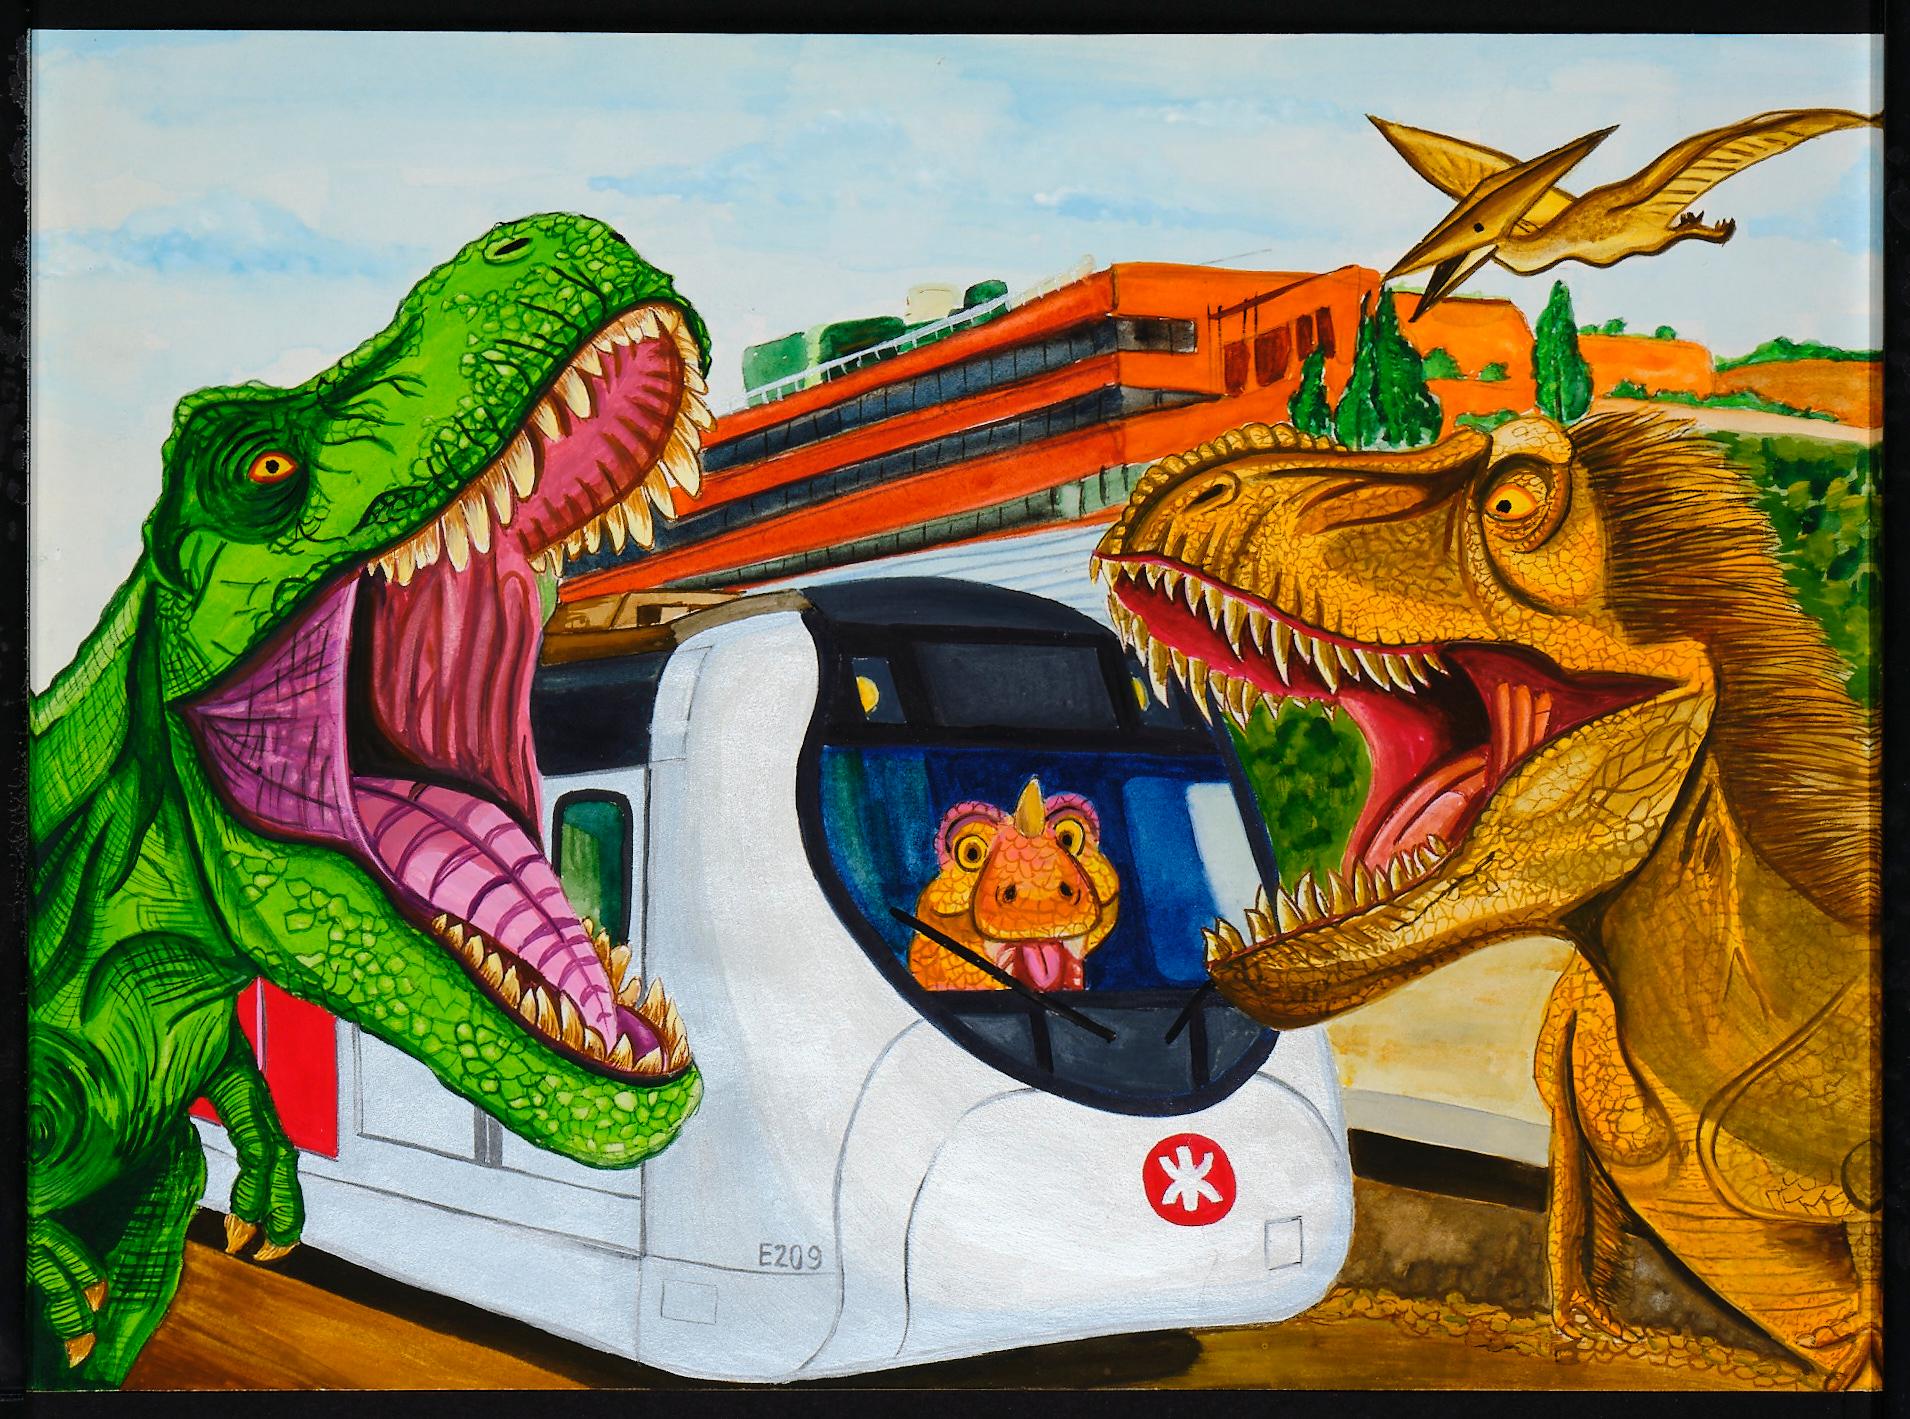 The winning entries of the "MTR x Dinosaur Adventure Art Competition 2022" will be displayed at the Hong Kong Science Museum from August 12 (Friday). Picture shows the artwork of Leung Lok-ching from St Matthew's Lutheran School (Sau Mau Ping), the champion of the Senior Primary Level under the Painting Category of the competition.